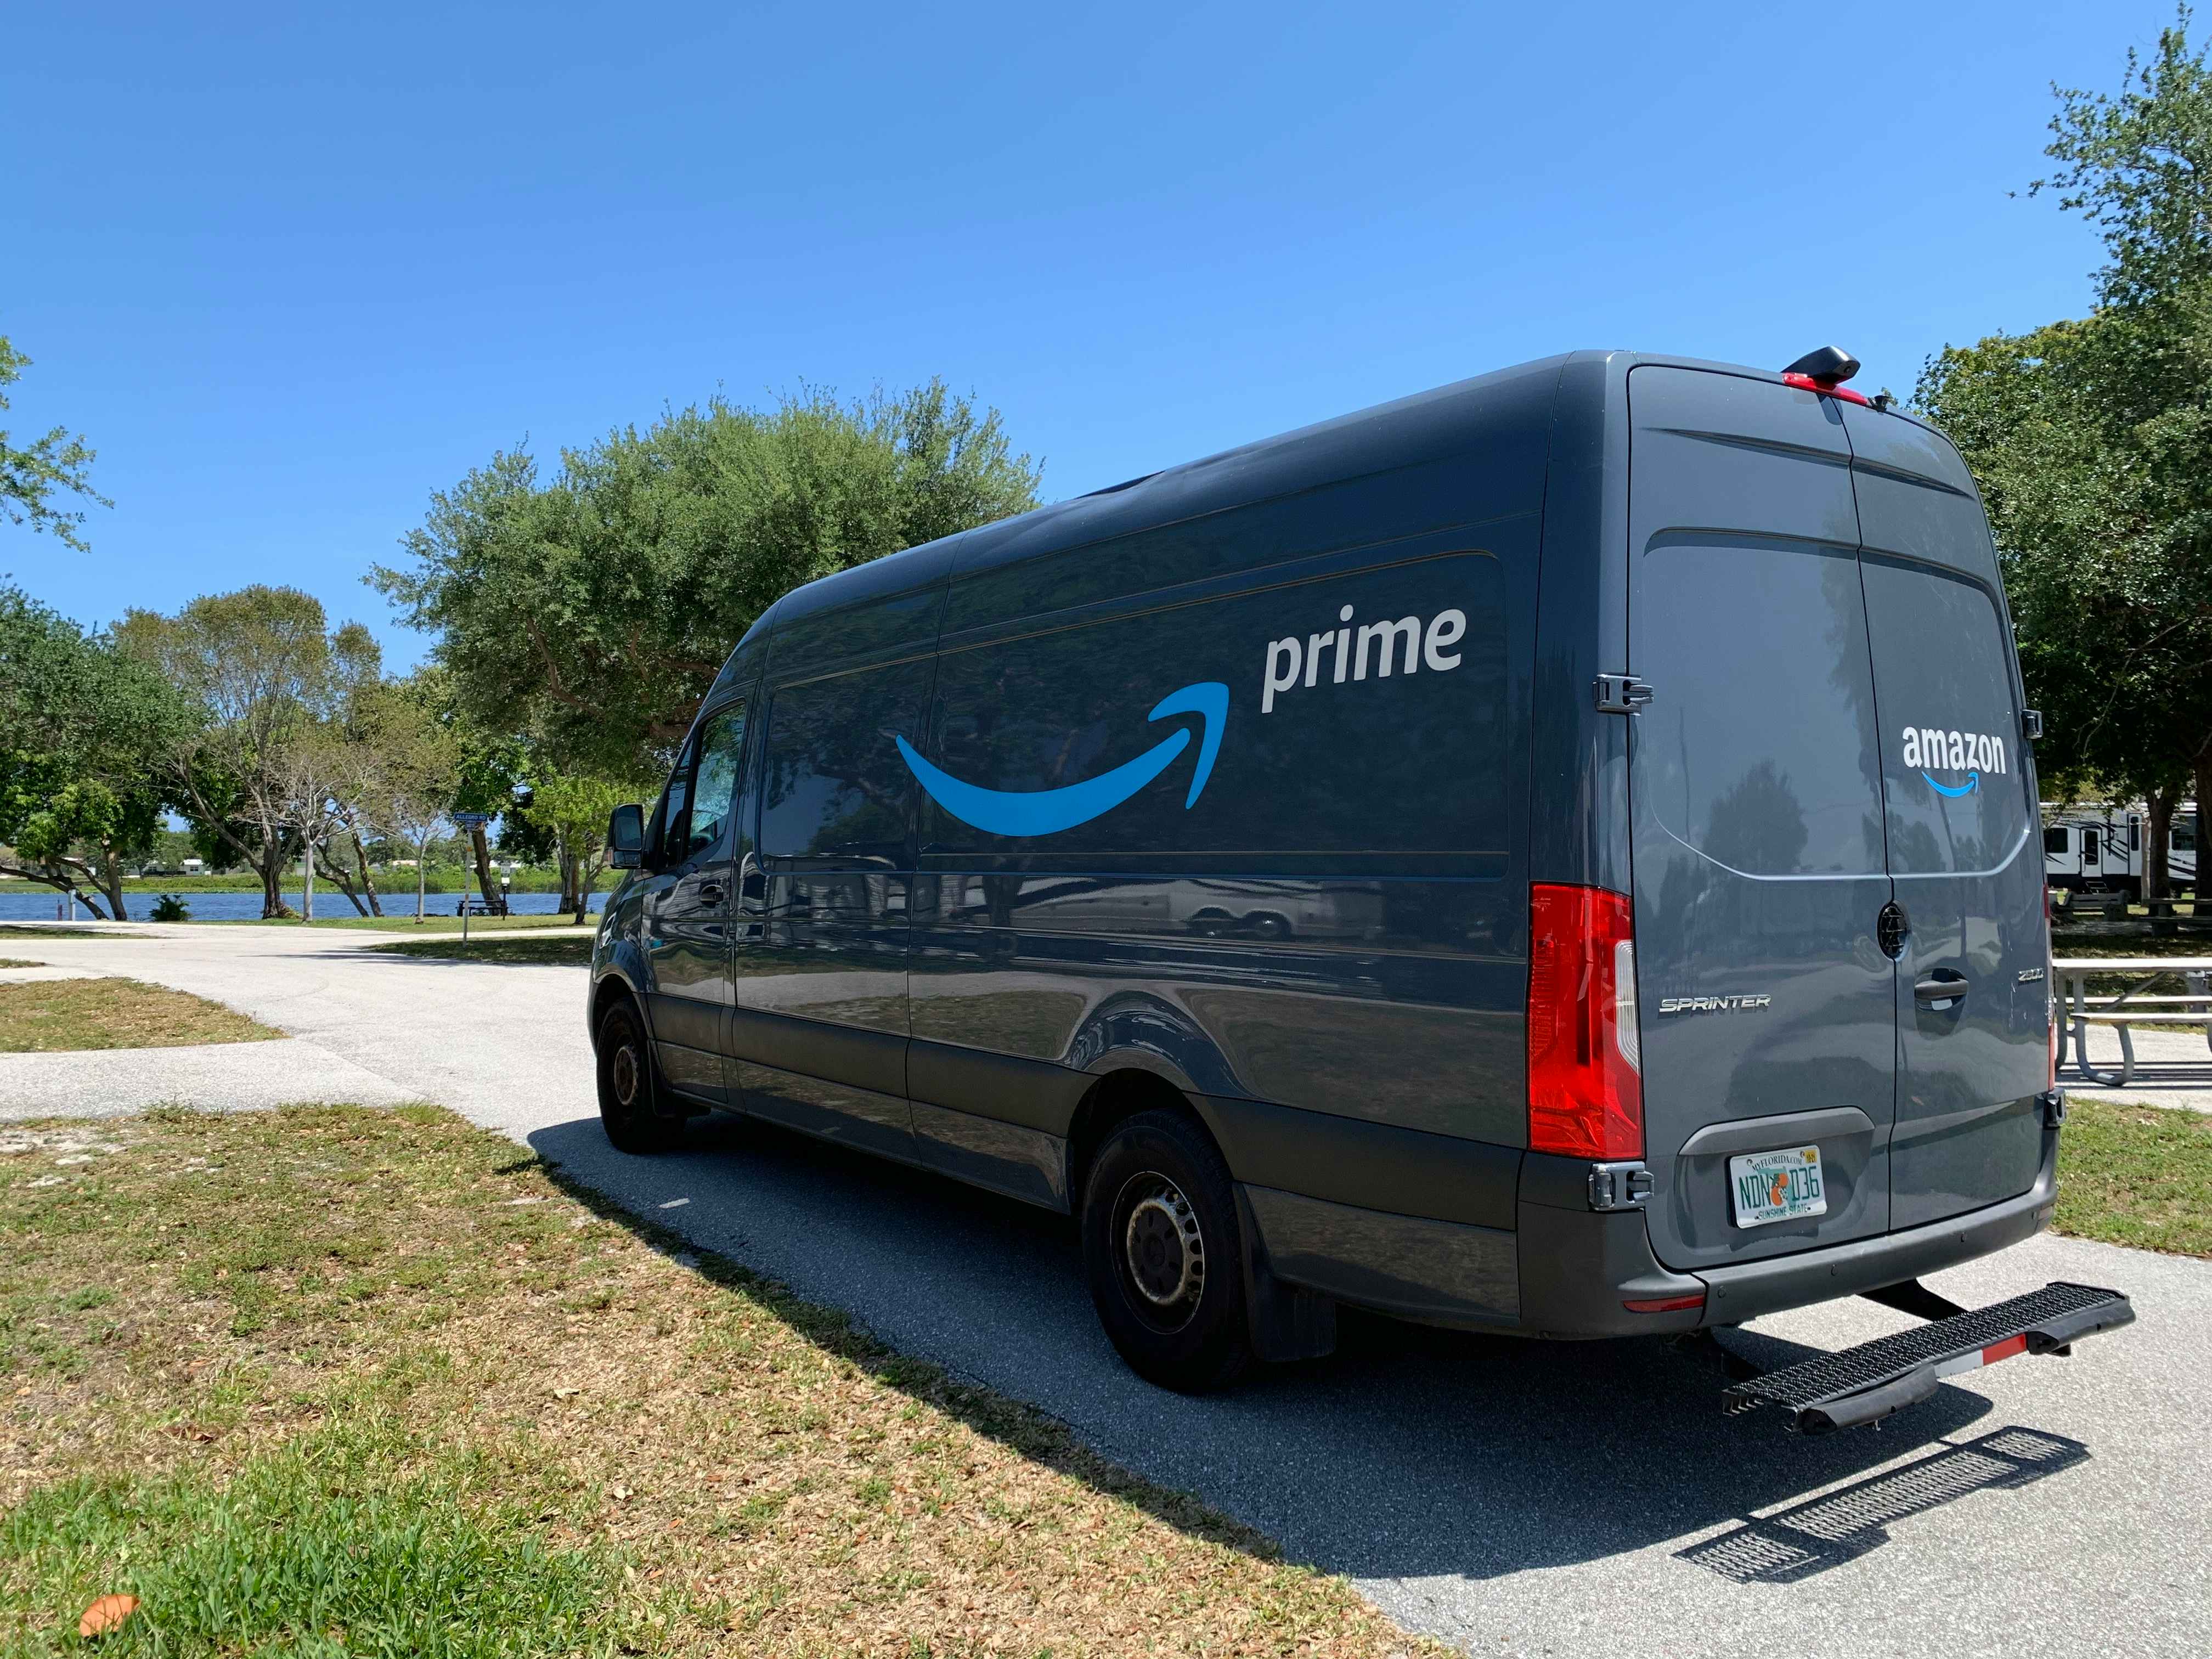 An Amazon delivery van parked in a driveway.